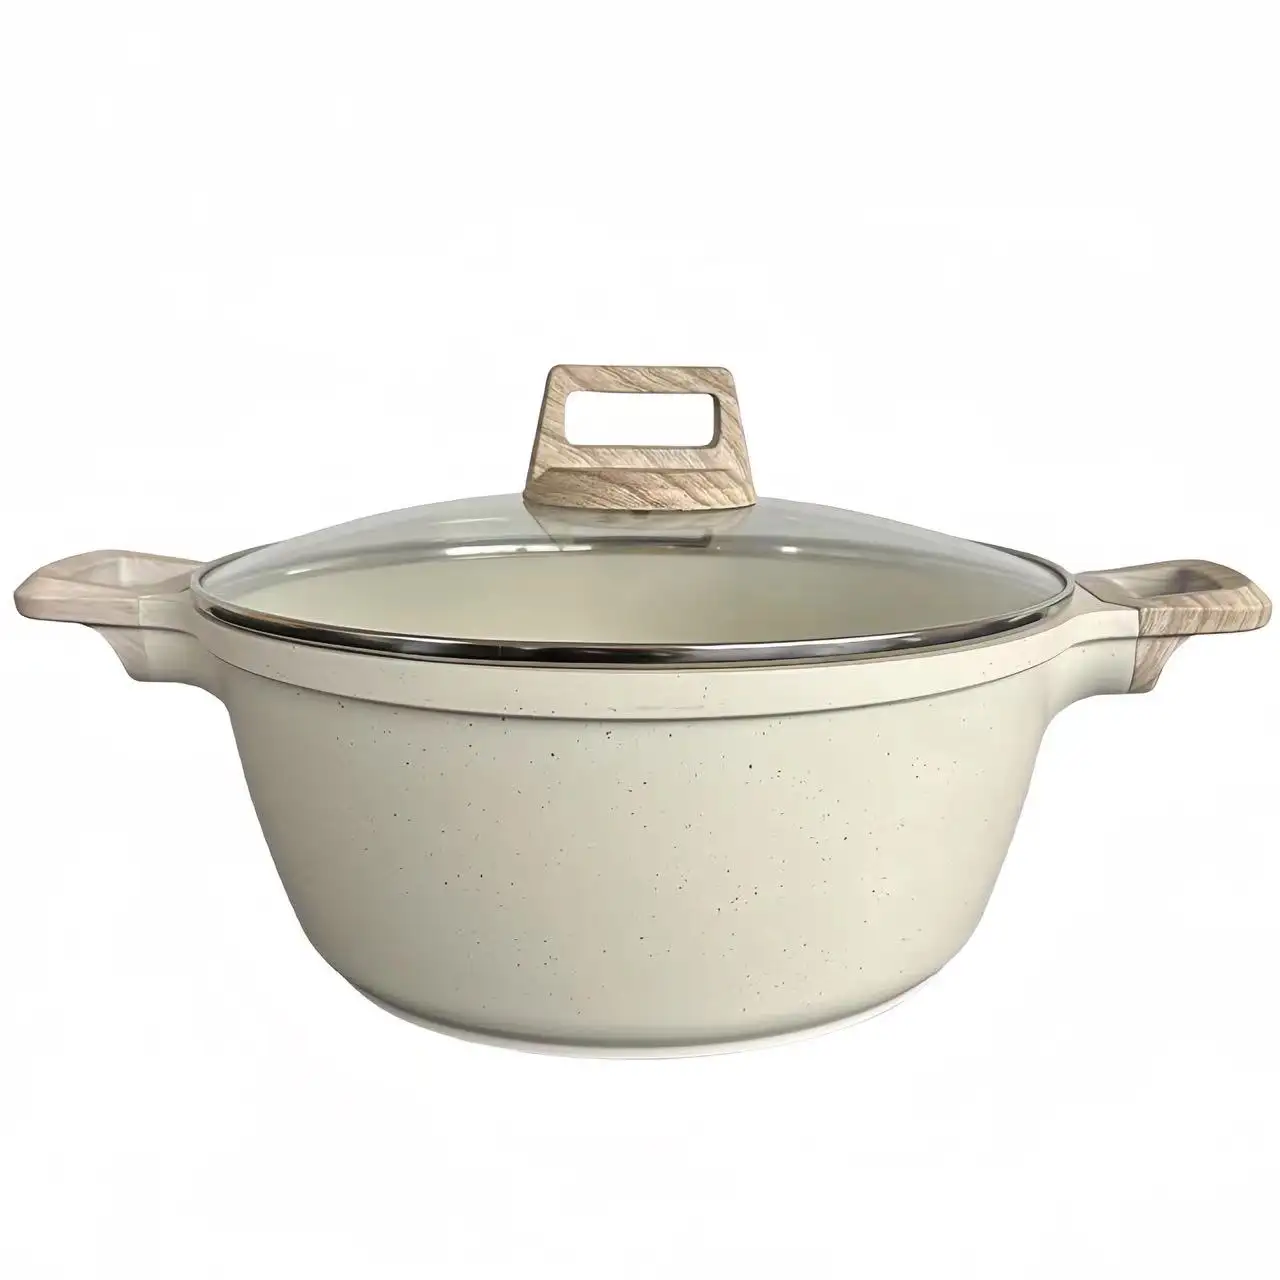 Modern Design Sustainable ceramic Non-Stick Cookware Aluminium Cooking Pot Casserole with Glass Lid Metal Material